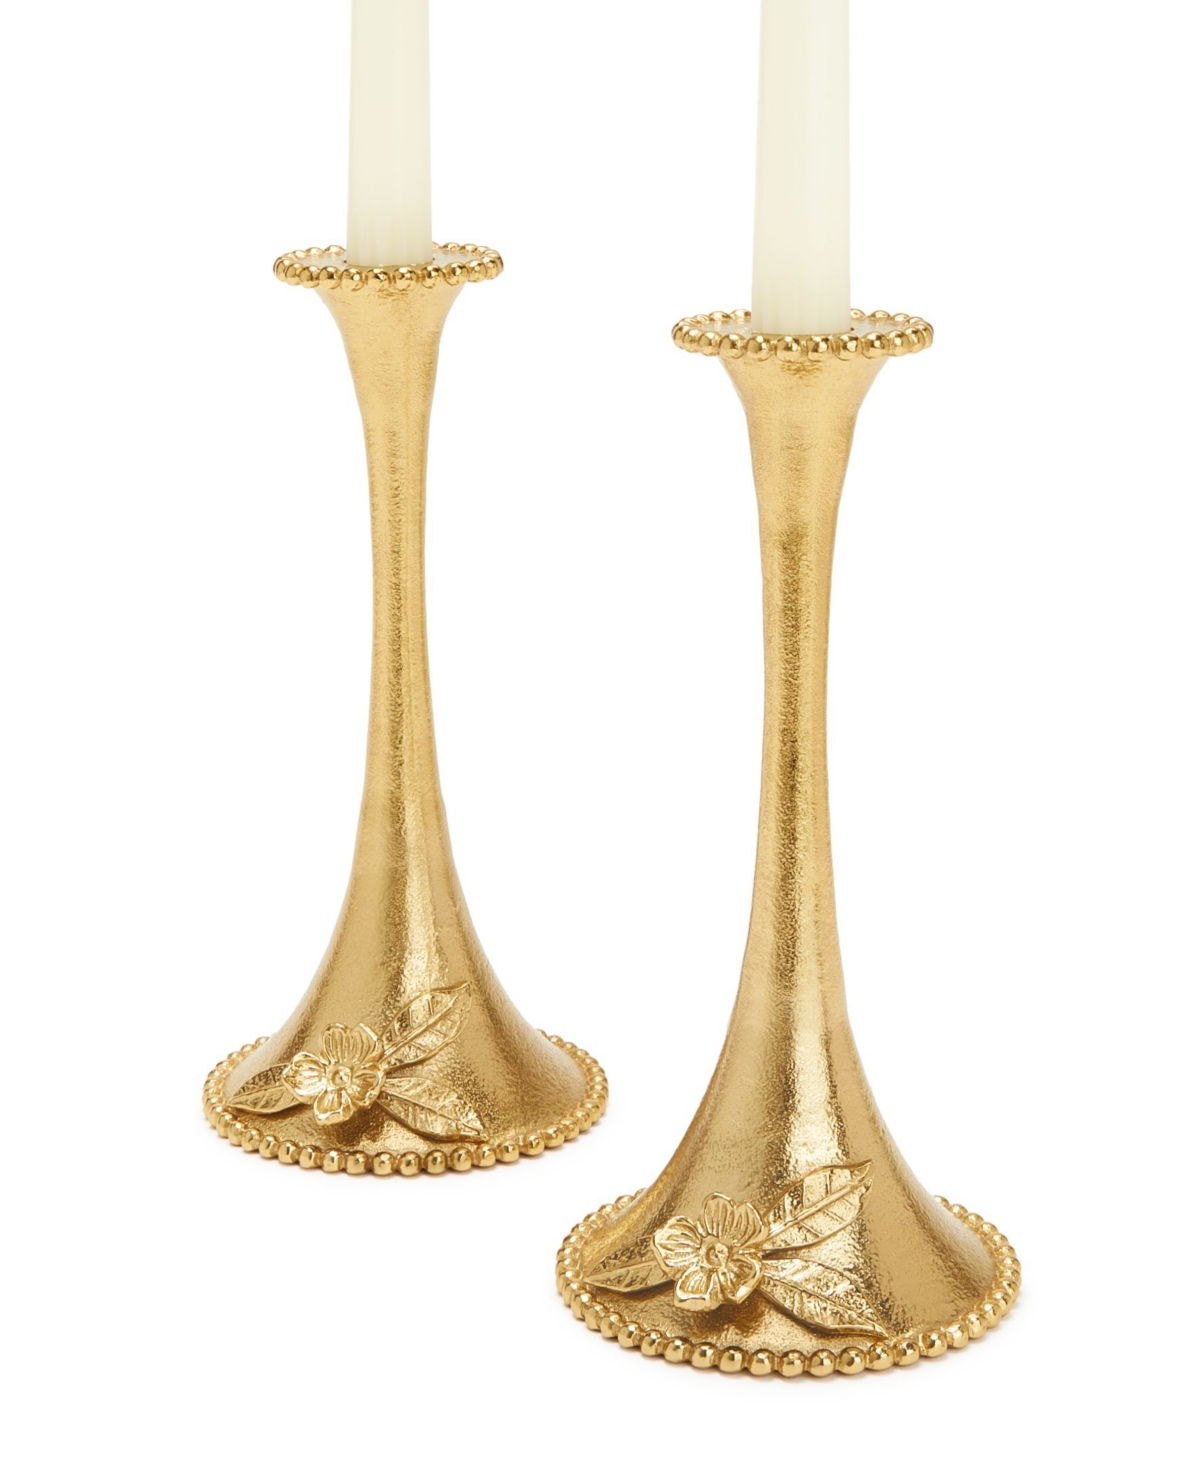 Gilded Candle Holders, Set of 2, Created for Macy's